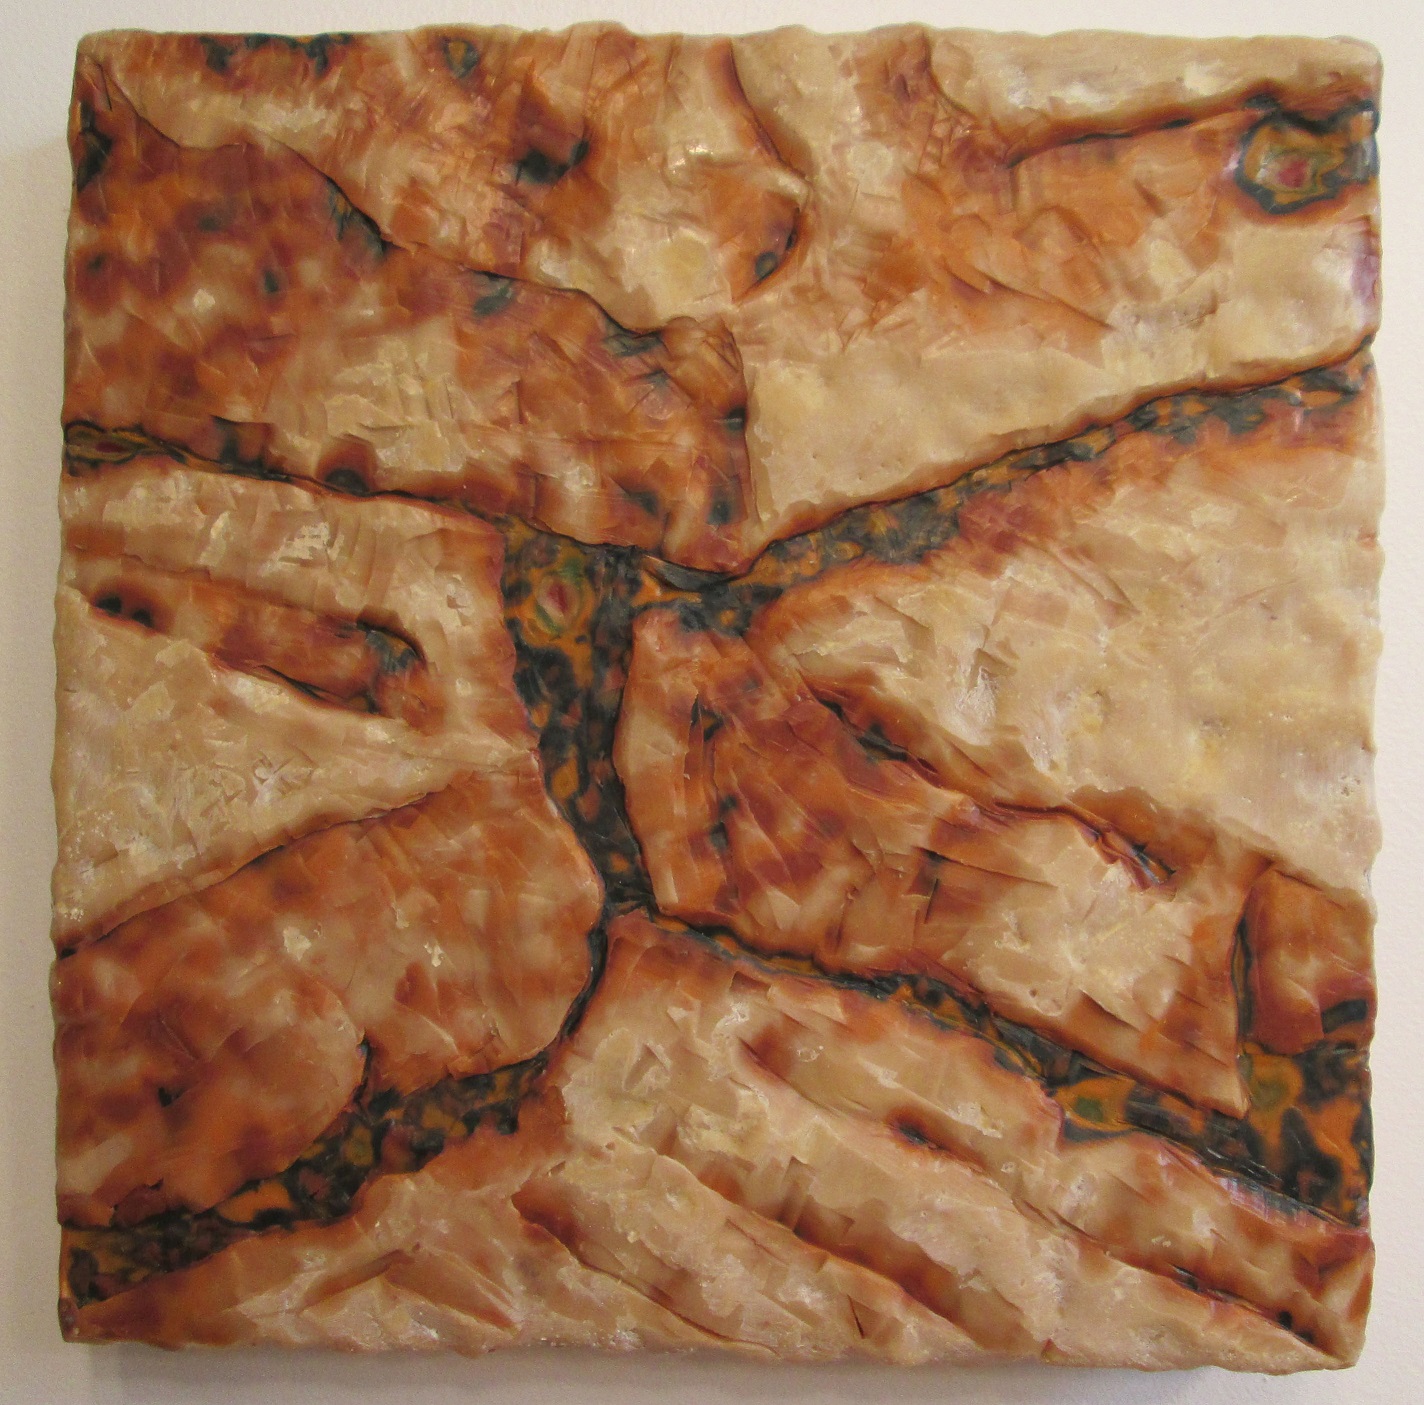 Excavation #9; Layered and carved encaustic with oils on wooden panel; 12"h x 12"w x 2.25"d; 2001